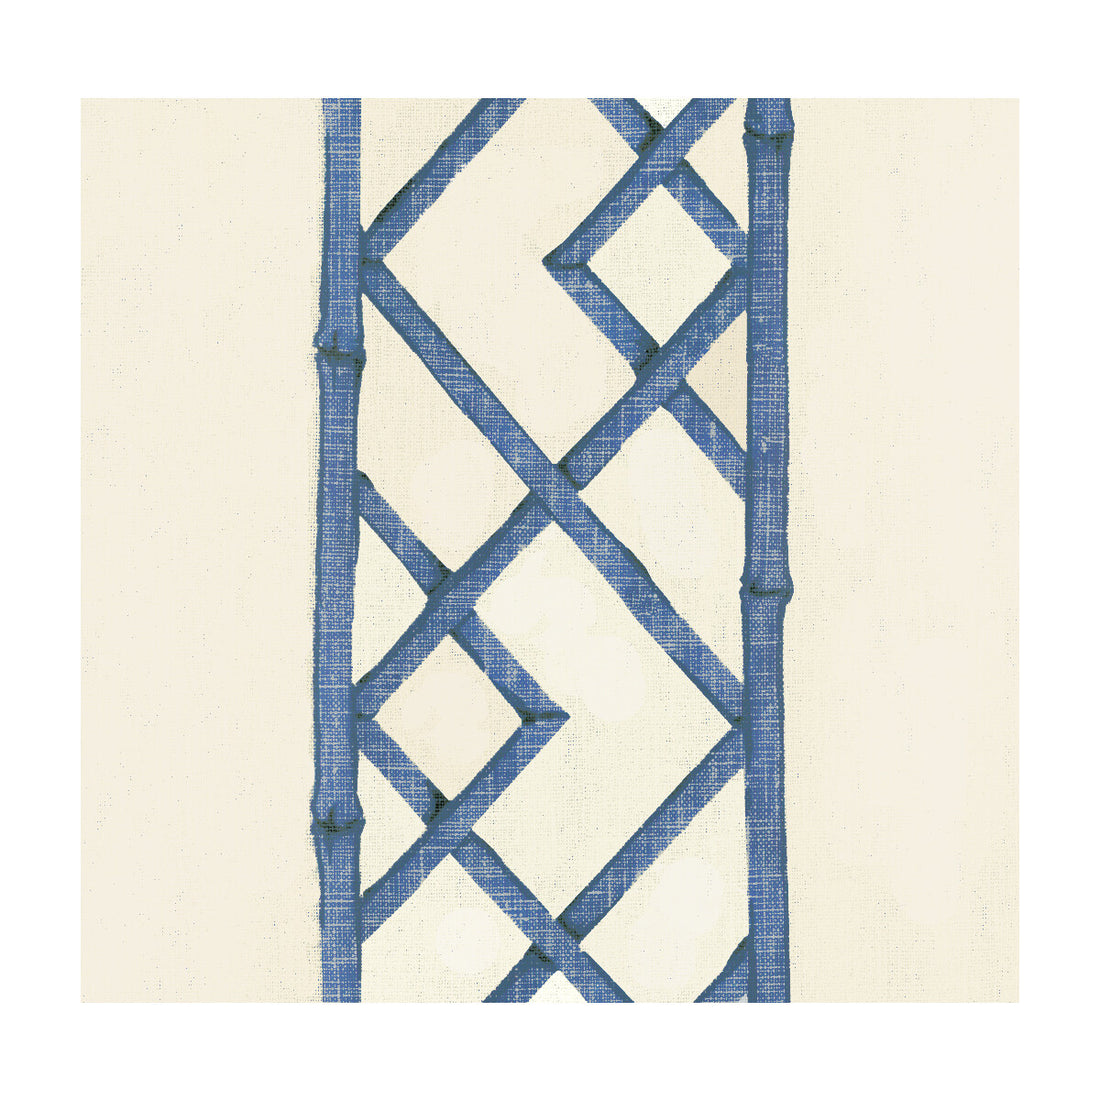 Latticely fabric in ultramarine color - pattern LATTICELY.516.0 - by Kravet Basics in the Sarah Richardson Harmony collection